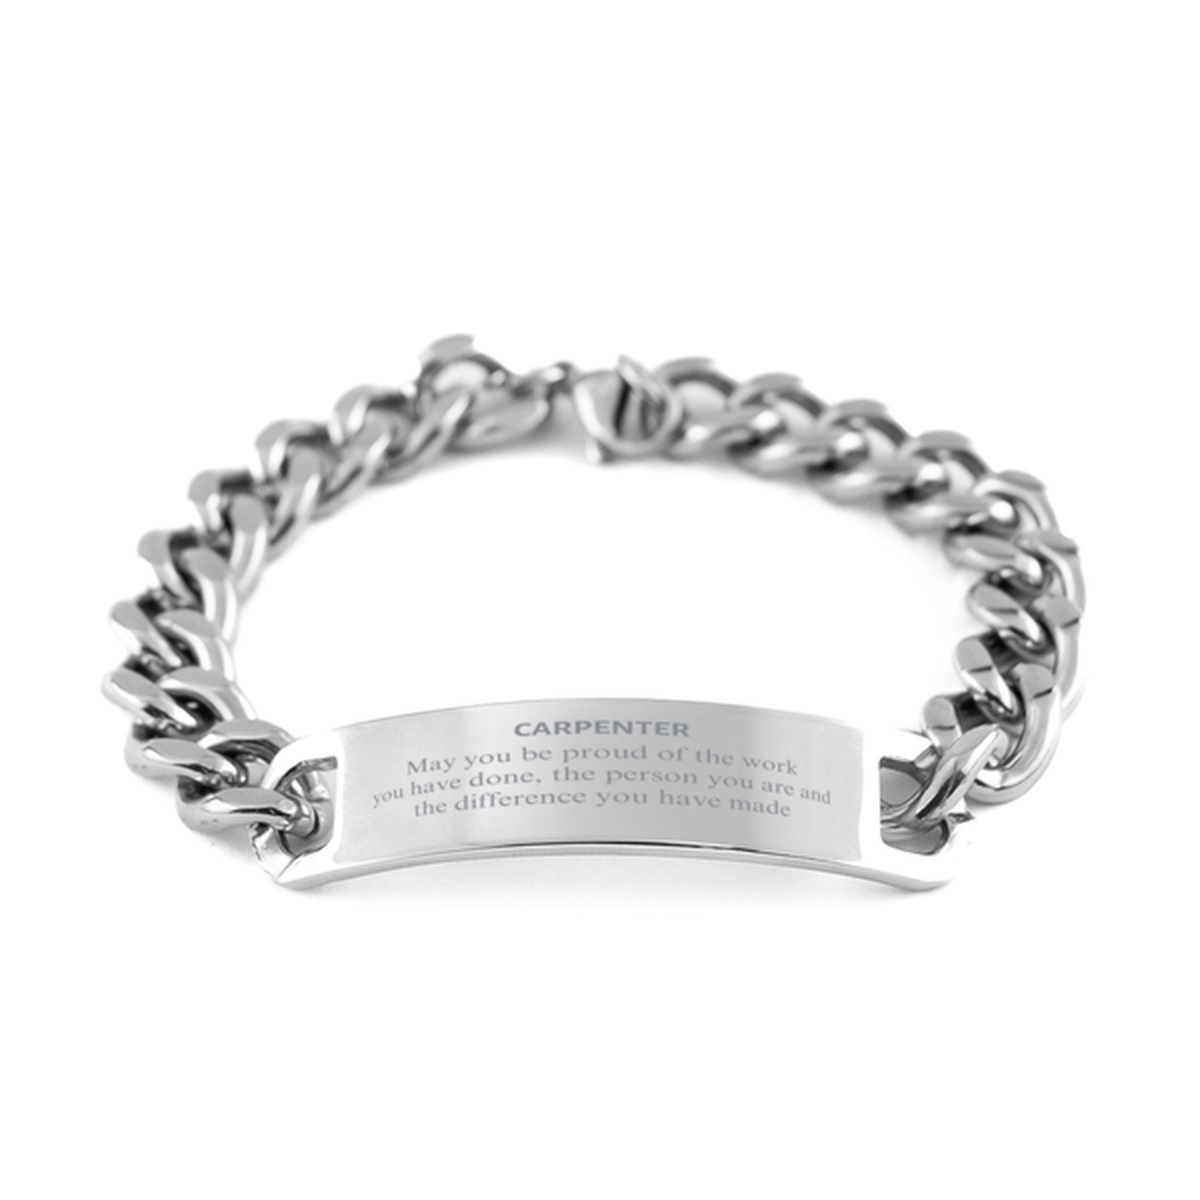 Carpenter May you be proud of the work you have done, Retirement Carpenter Cuban Chain Stainless Steel Bracelet for Colleague Appreciation Gifts Amazing for Carpenter